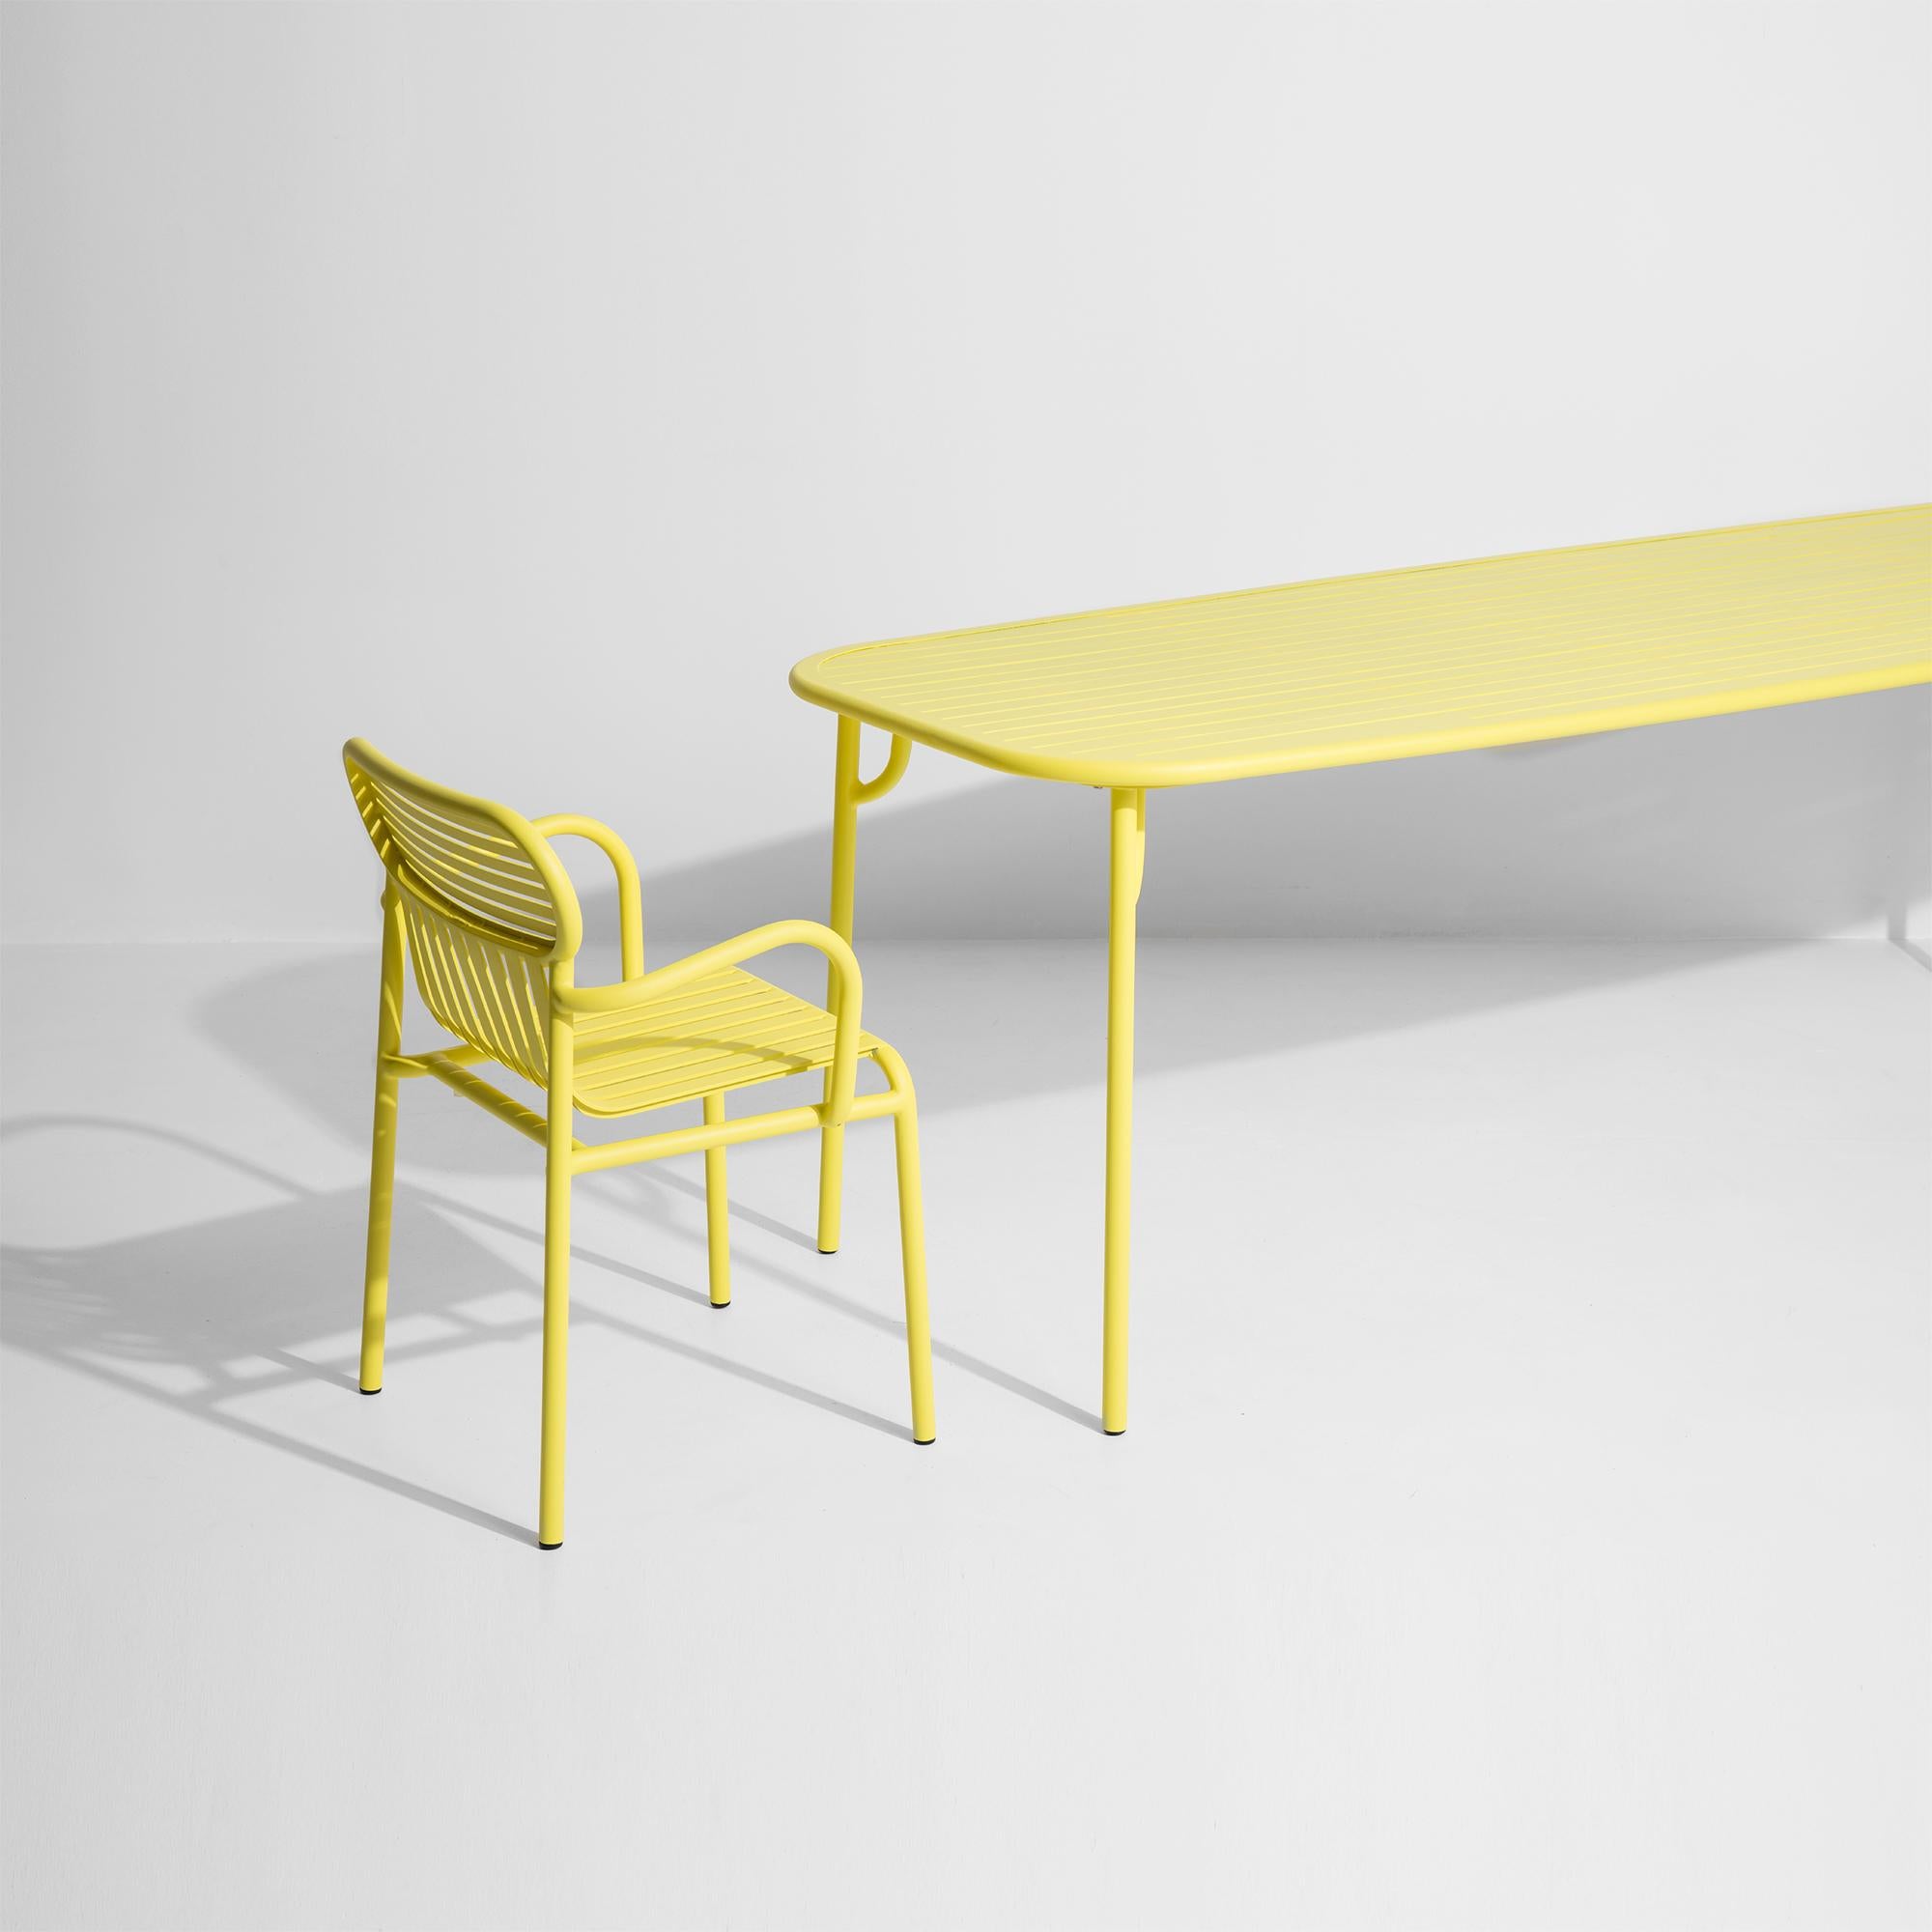 Petite Friture Week-End Medium Rectangular Dining Table in Saffron with Slats For Sale 2